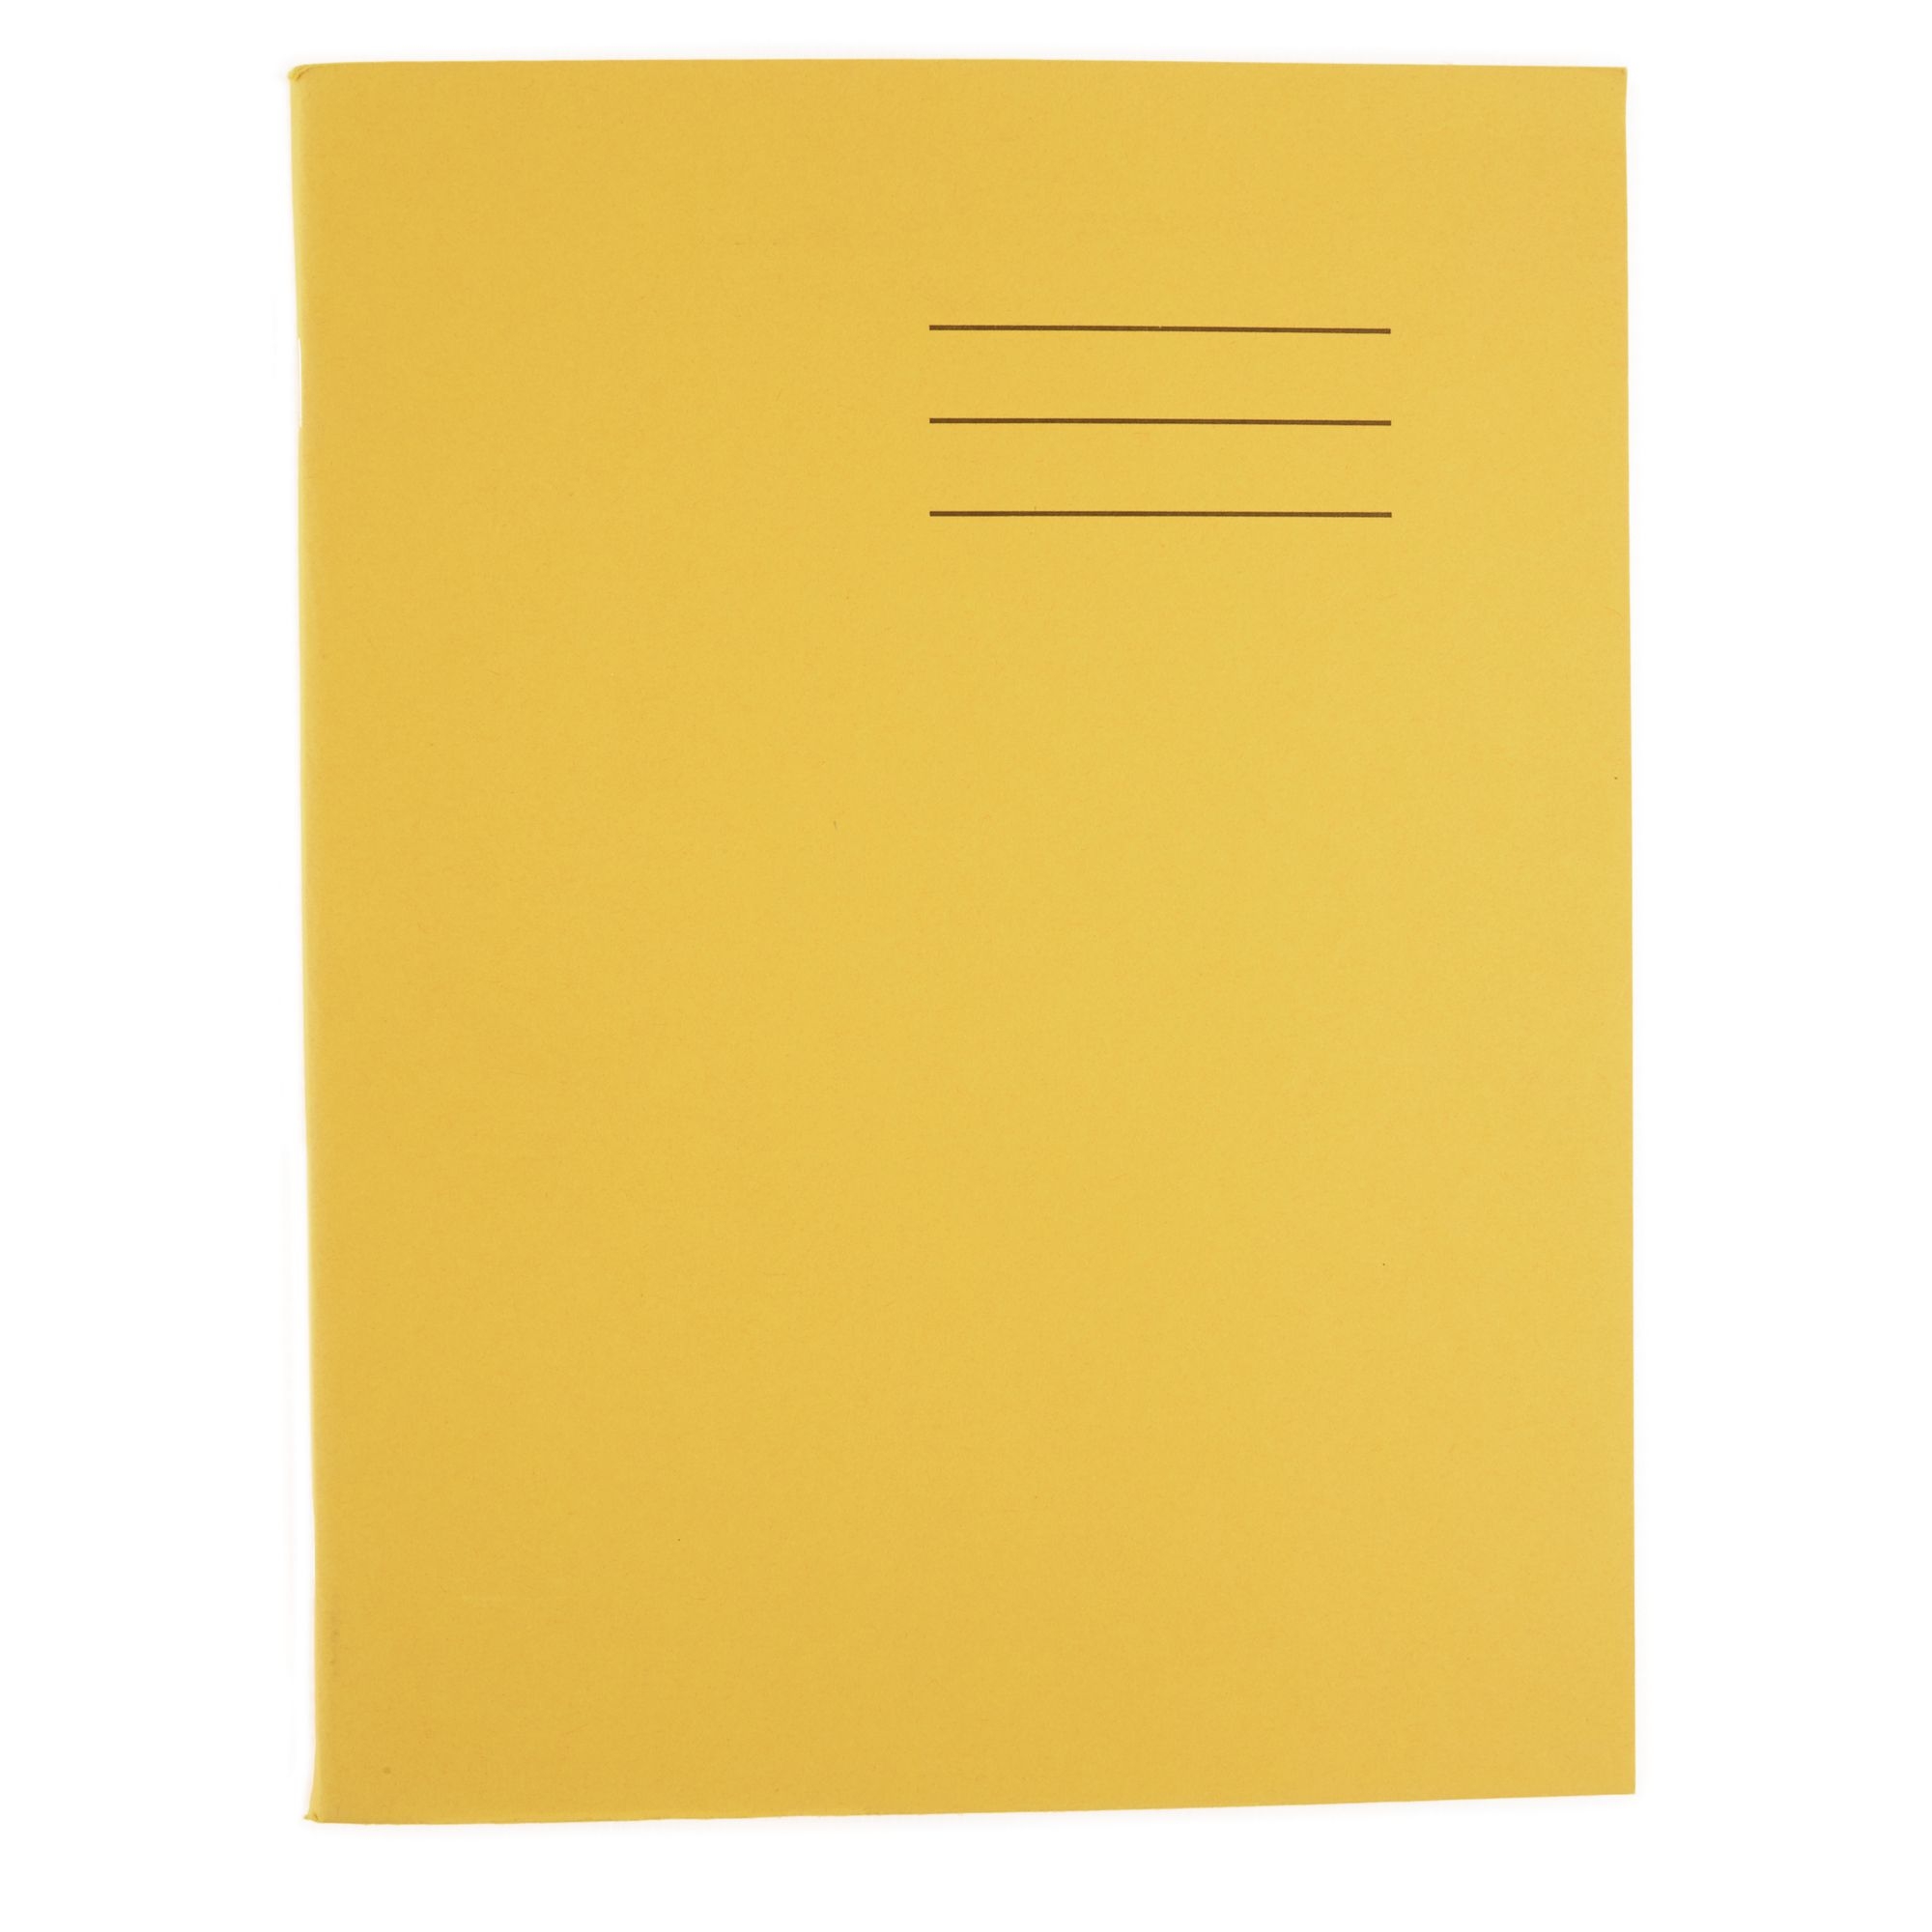 A4 Exercise Book 32 Page, 10mm Squared, Yellow - Pack of 100